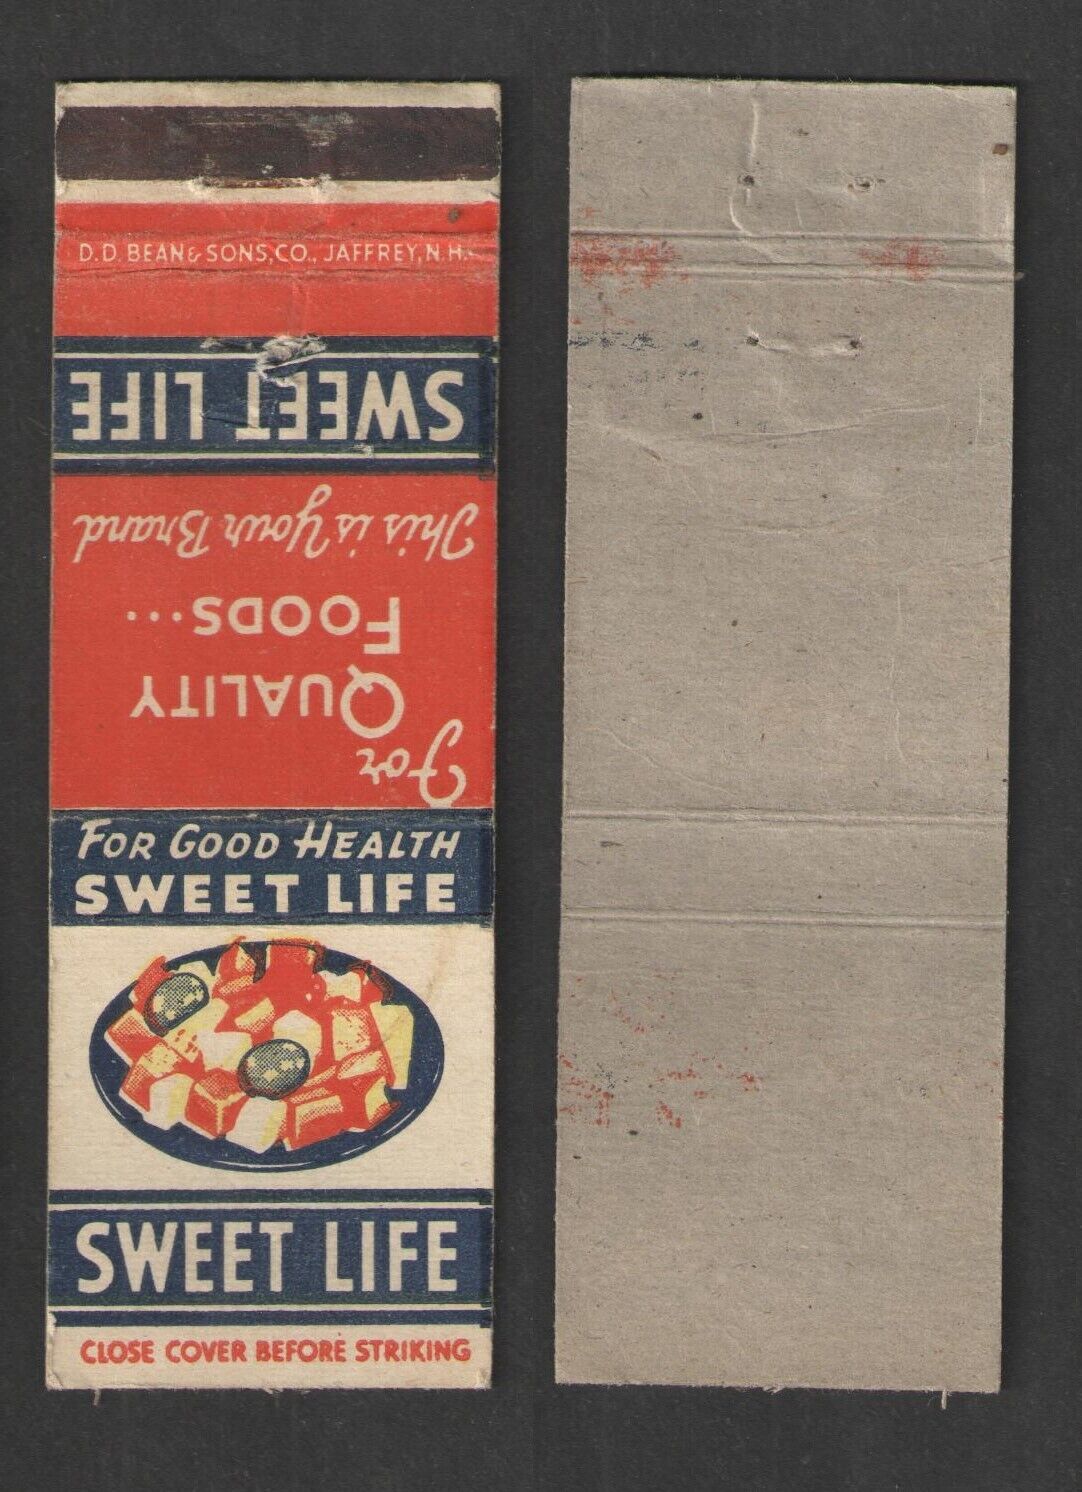 SWEET LIFE BRAND FOODS MATCHBOOK COVER